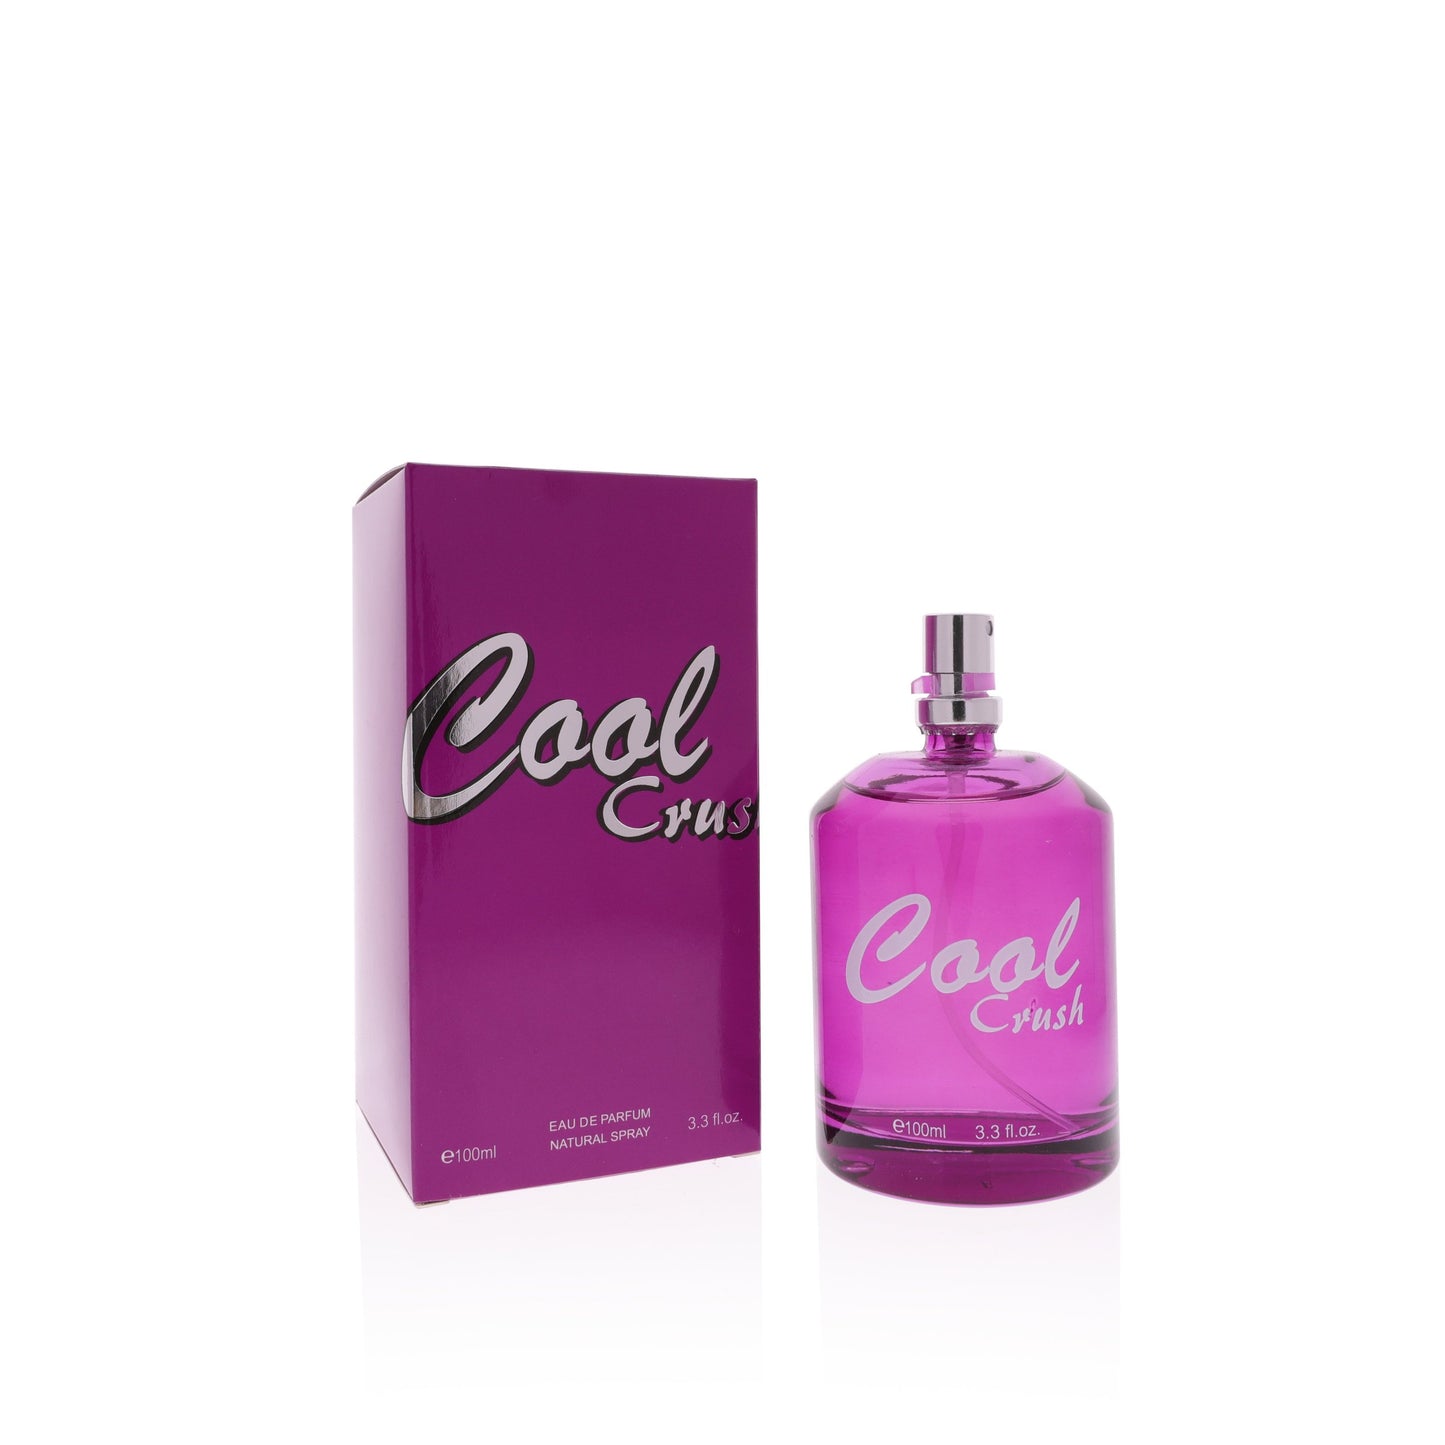 Cool Crush Women's Perfume: Embrace Fresh Elegance with this Captivating Fragrance - Shop Now on Shopify for a Cool and Chic Scent!